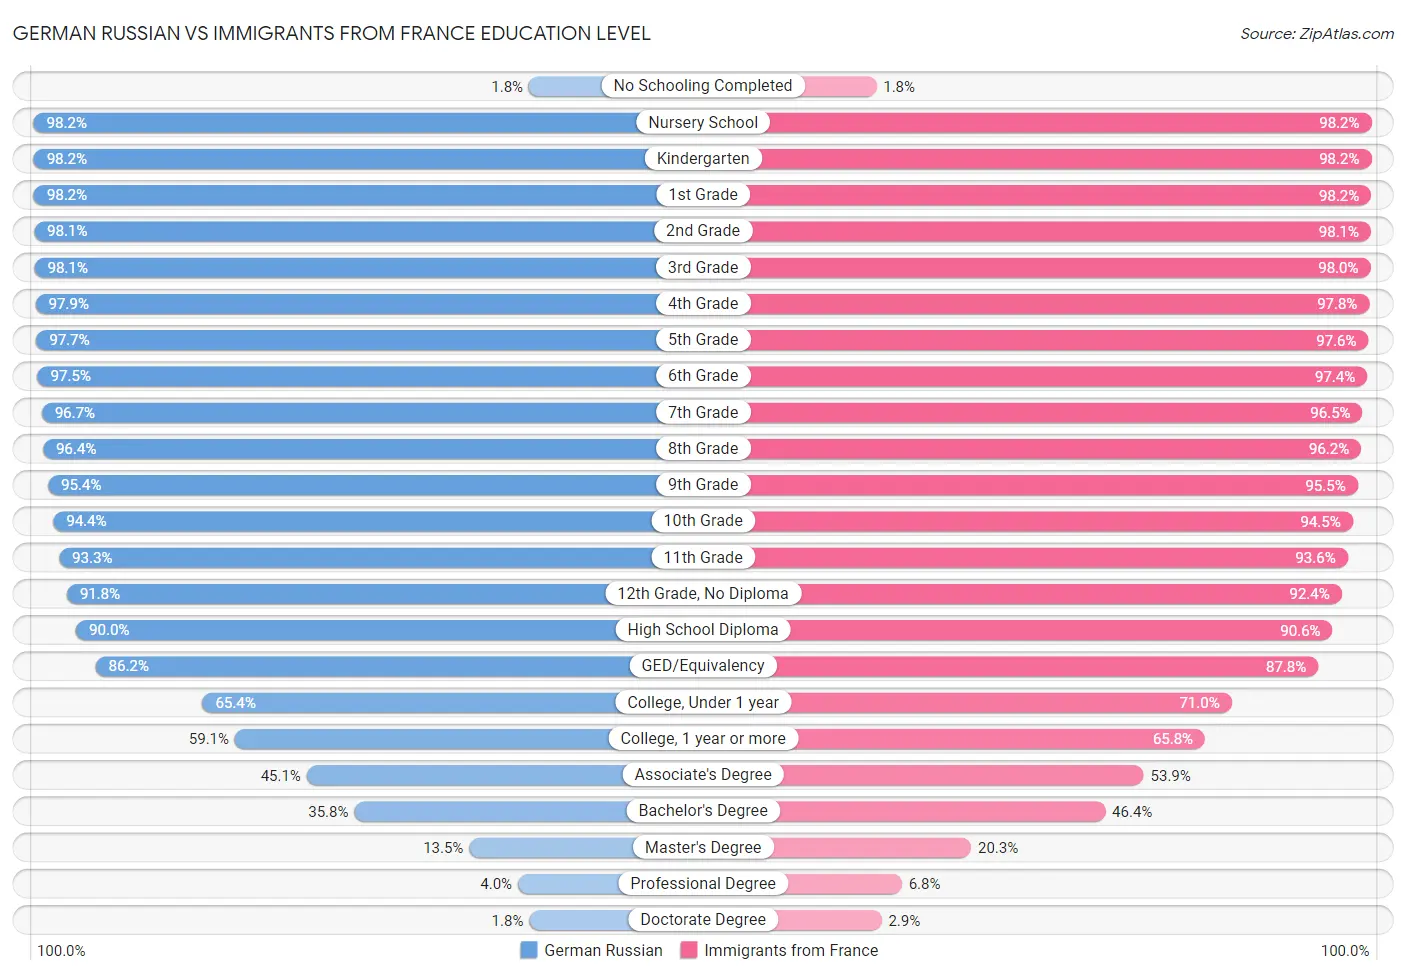 German Russian vs Immigrants from France Education Level